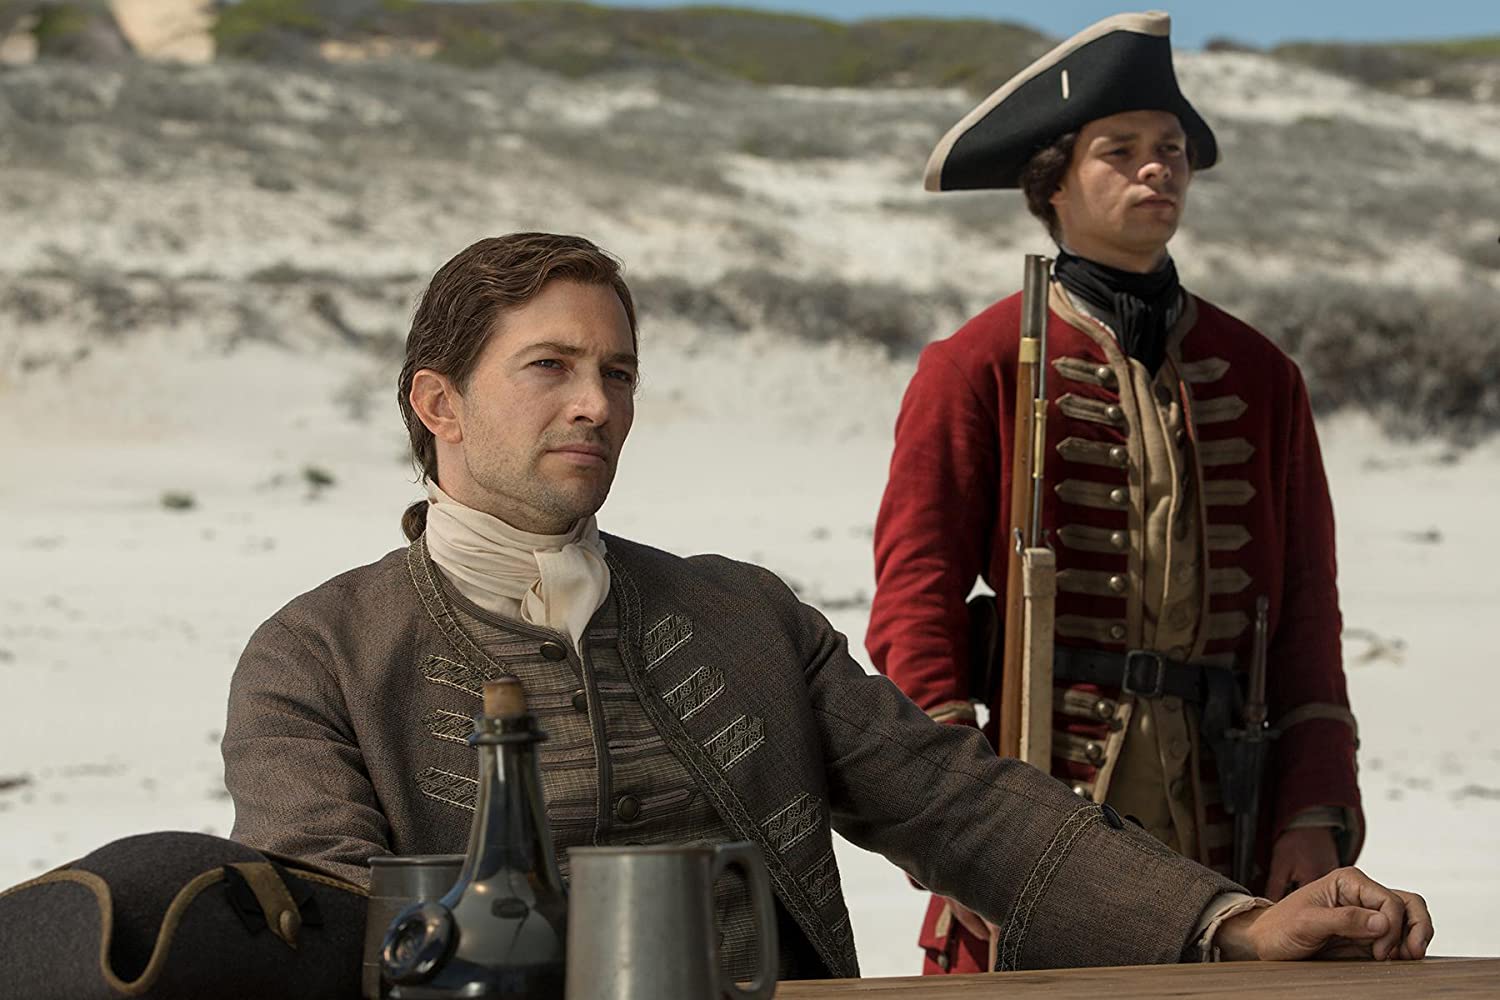 Luke Roberts stars as the privateer and governor of Nassau, Woodes Rogers, in Black Sails